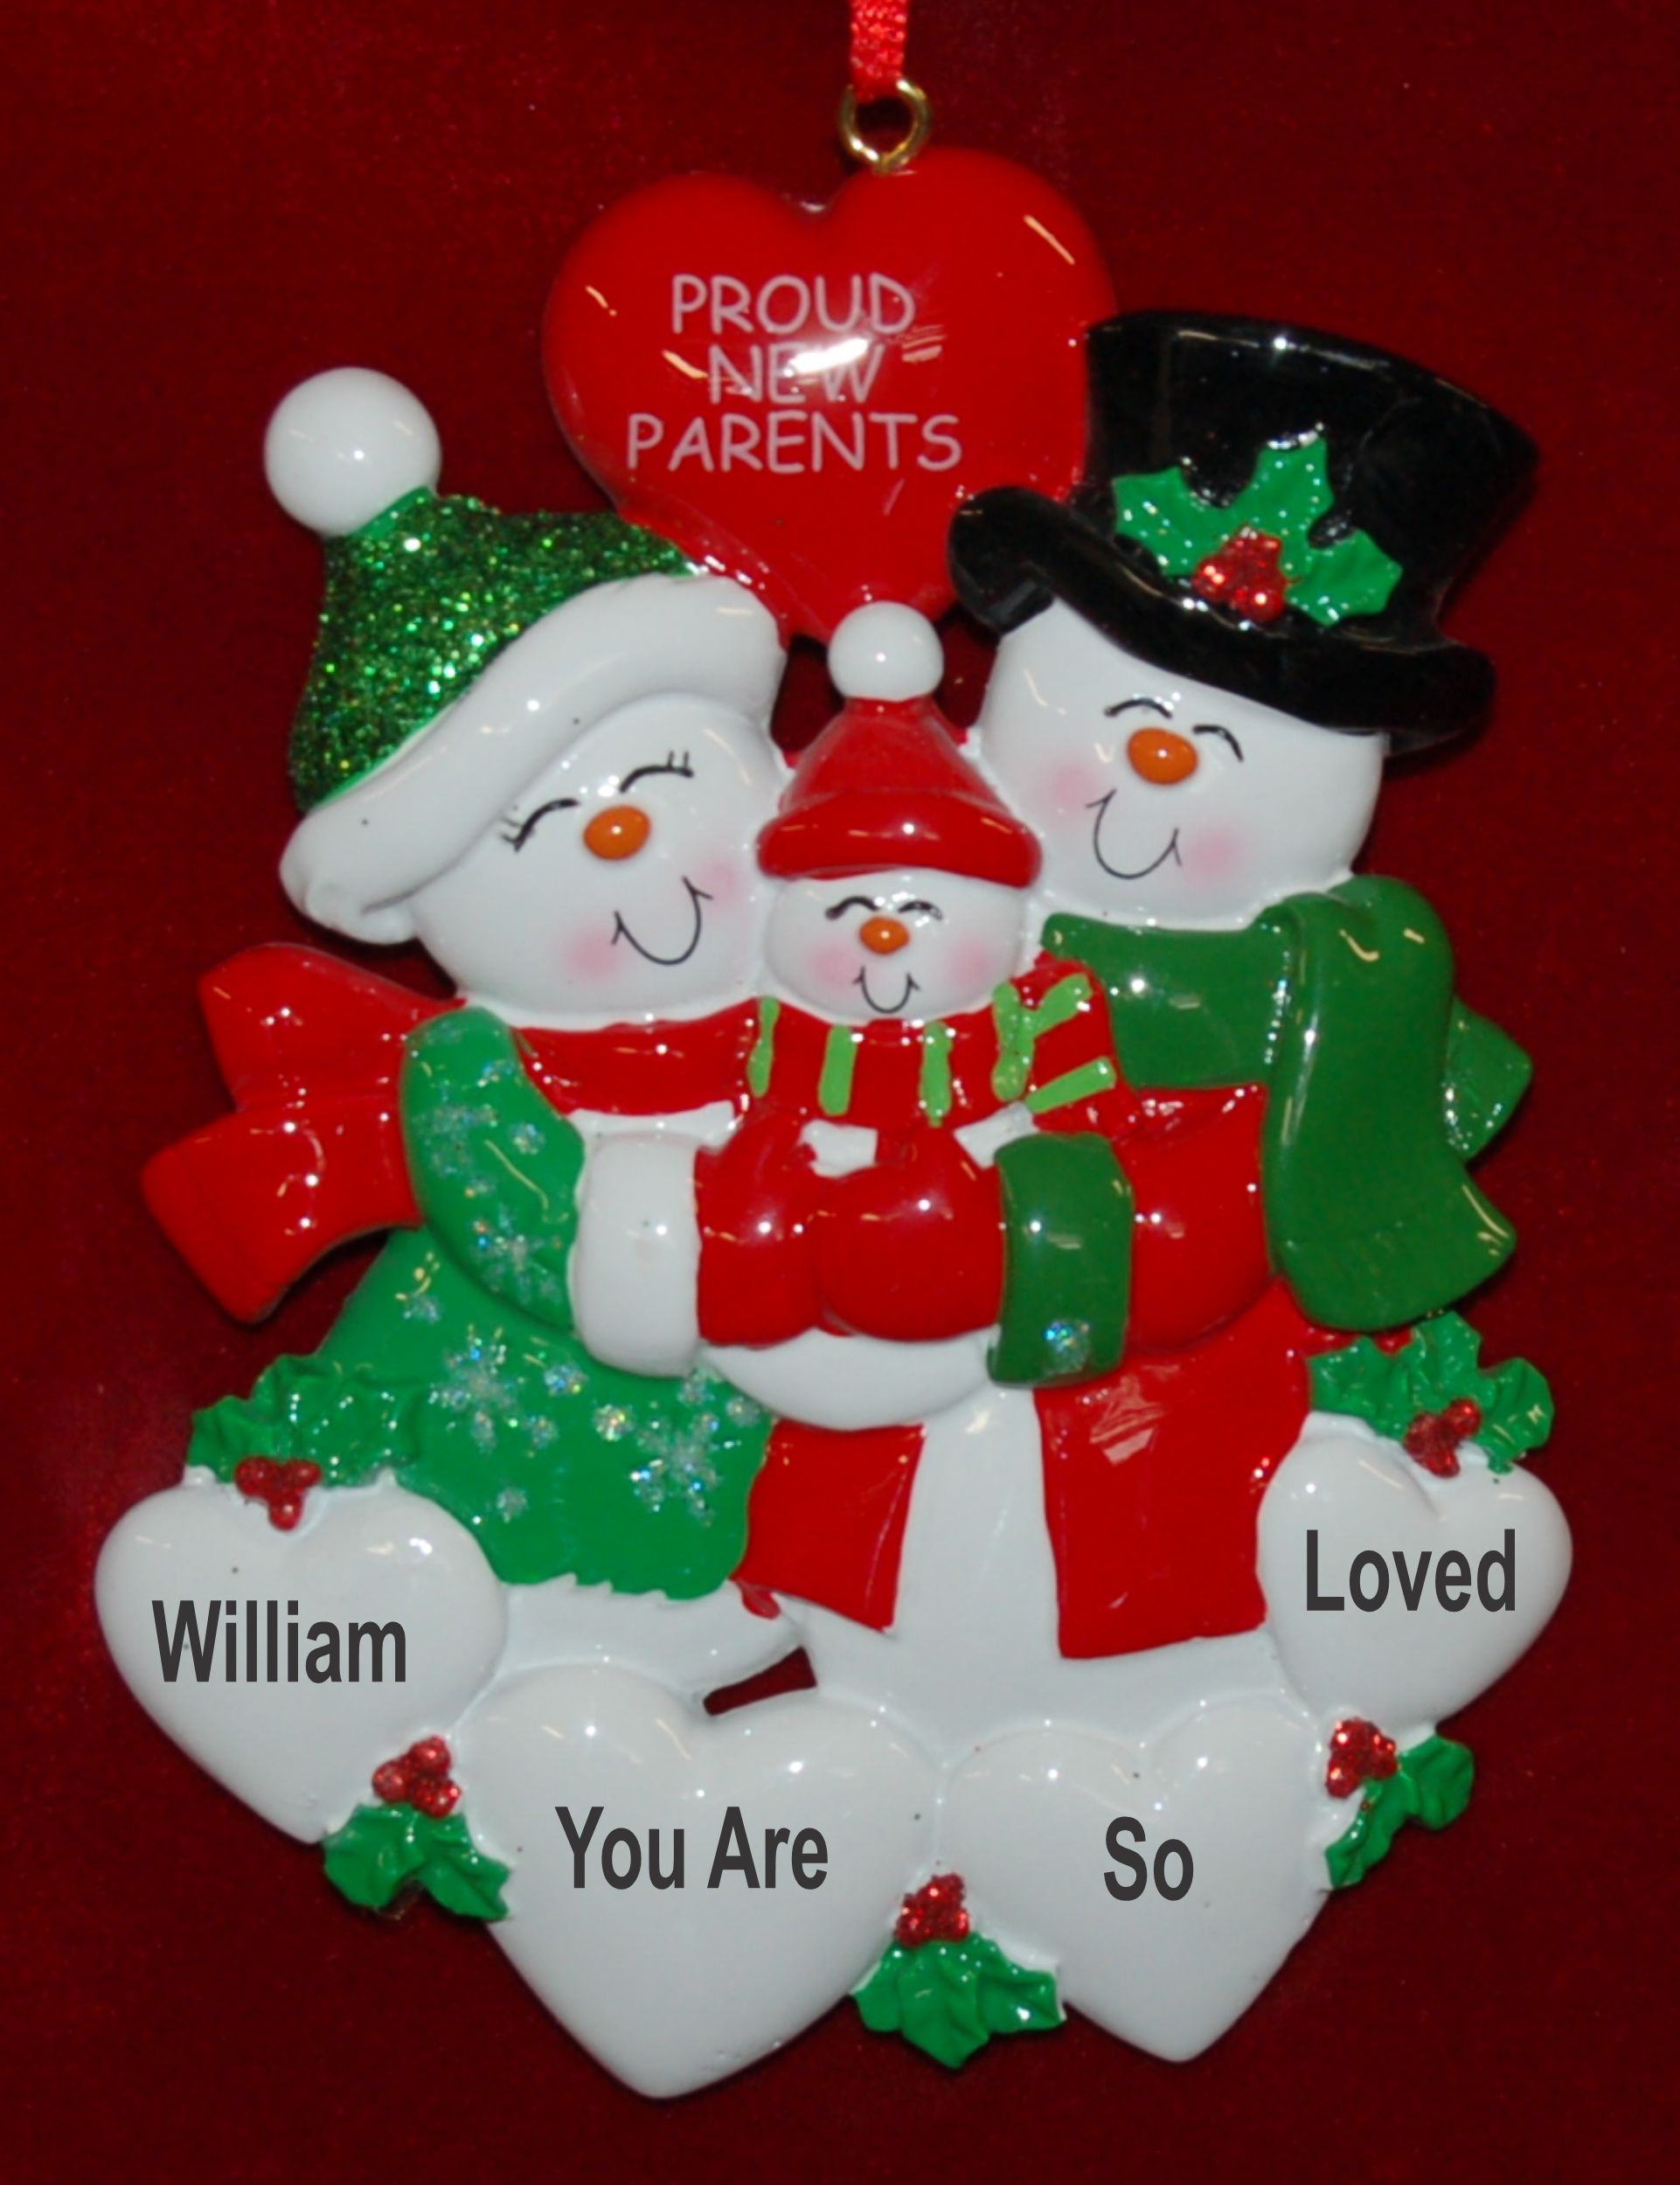 New Parents Christmas Ornament Our Family Grows Personalized by RussellRhodes.com